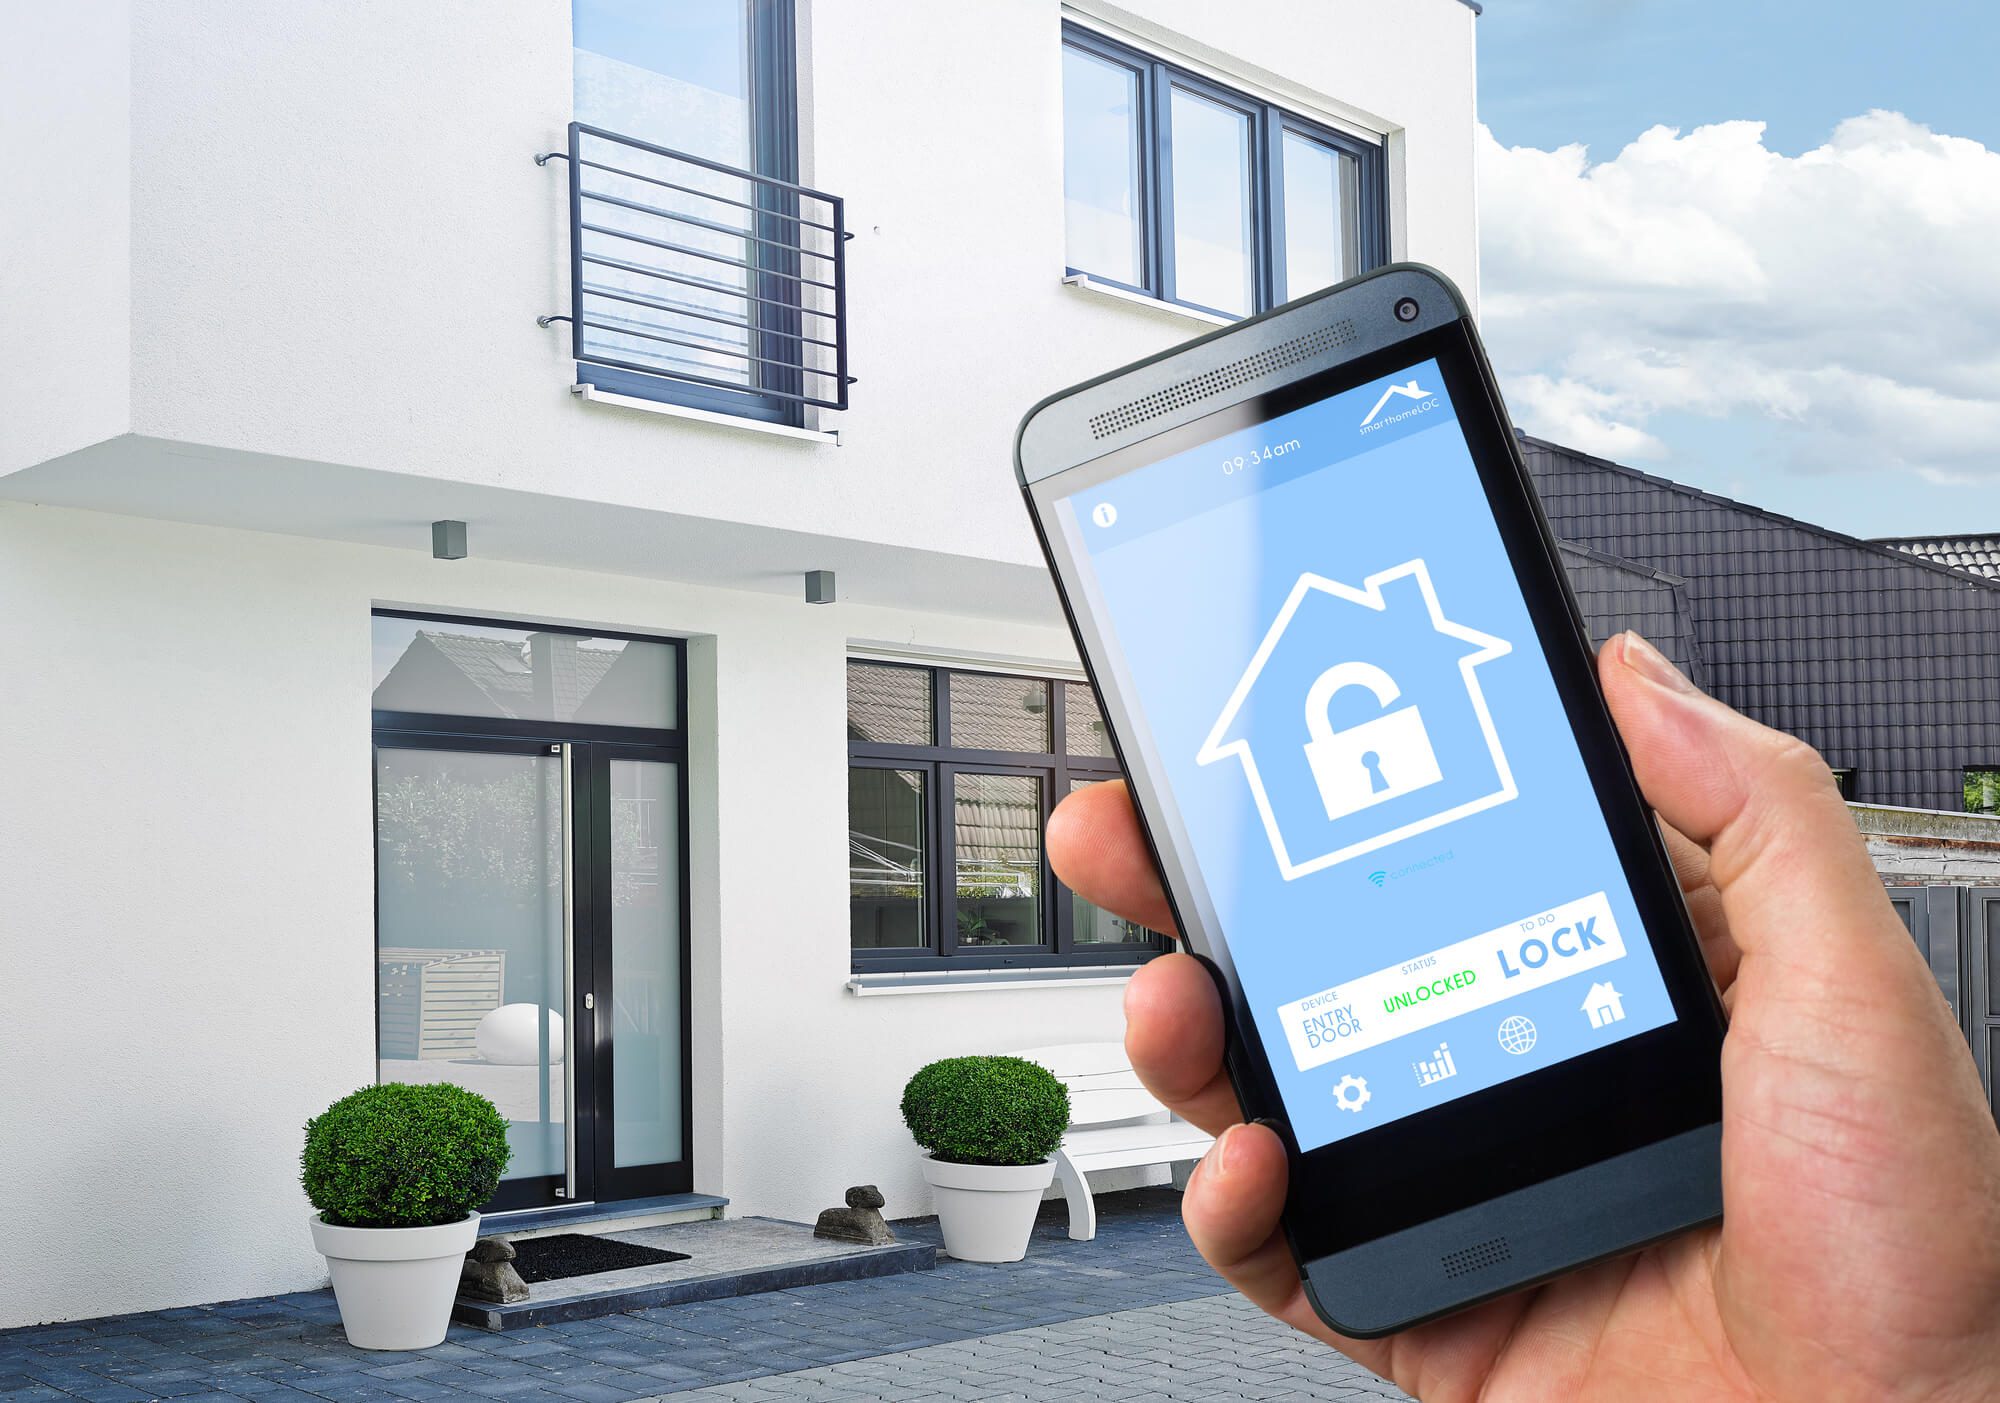 Upgrade your house to a smart home!